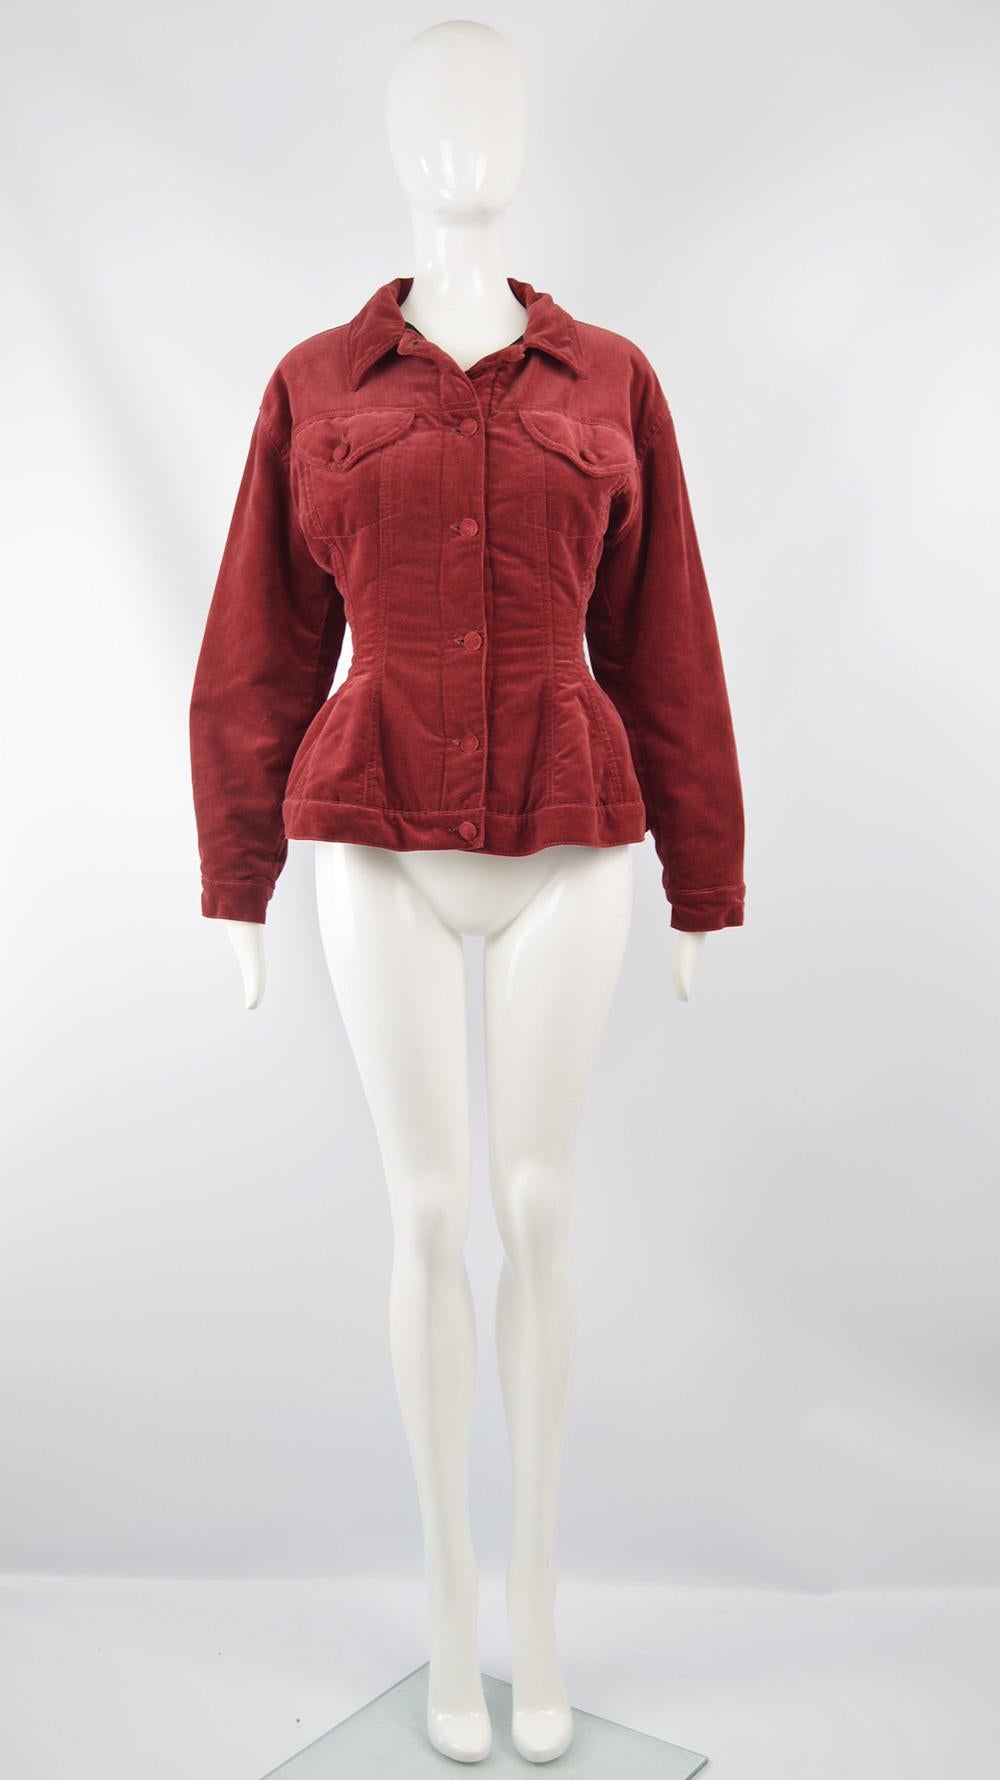 A beautiful vintage women's jacket from the 80s by iconic French fashion designer, Jean Paul Gaultier. Made in Italy, in a red velvet with covered button fastenings and a lightly quilted lining, making it perfect for spring and fall. It has